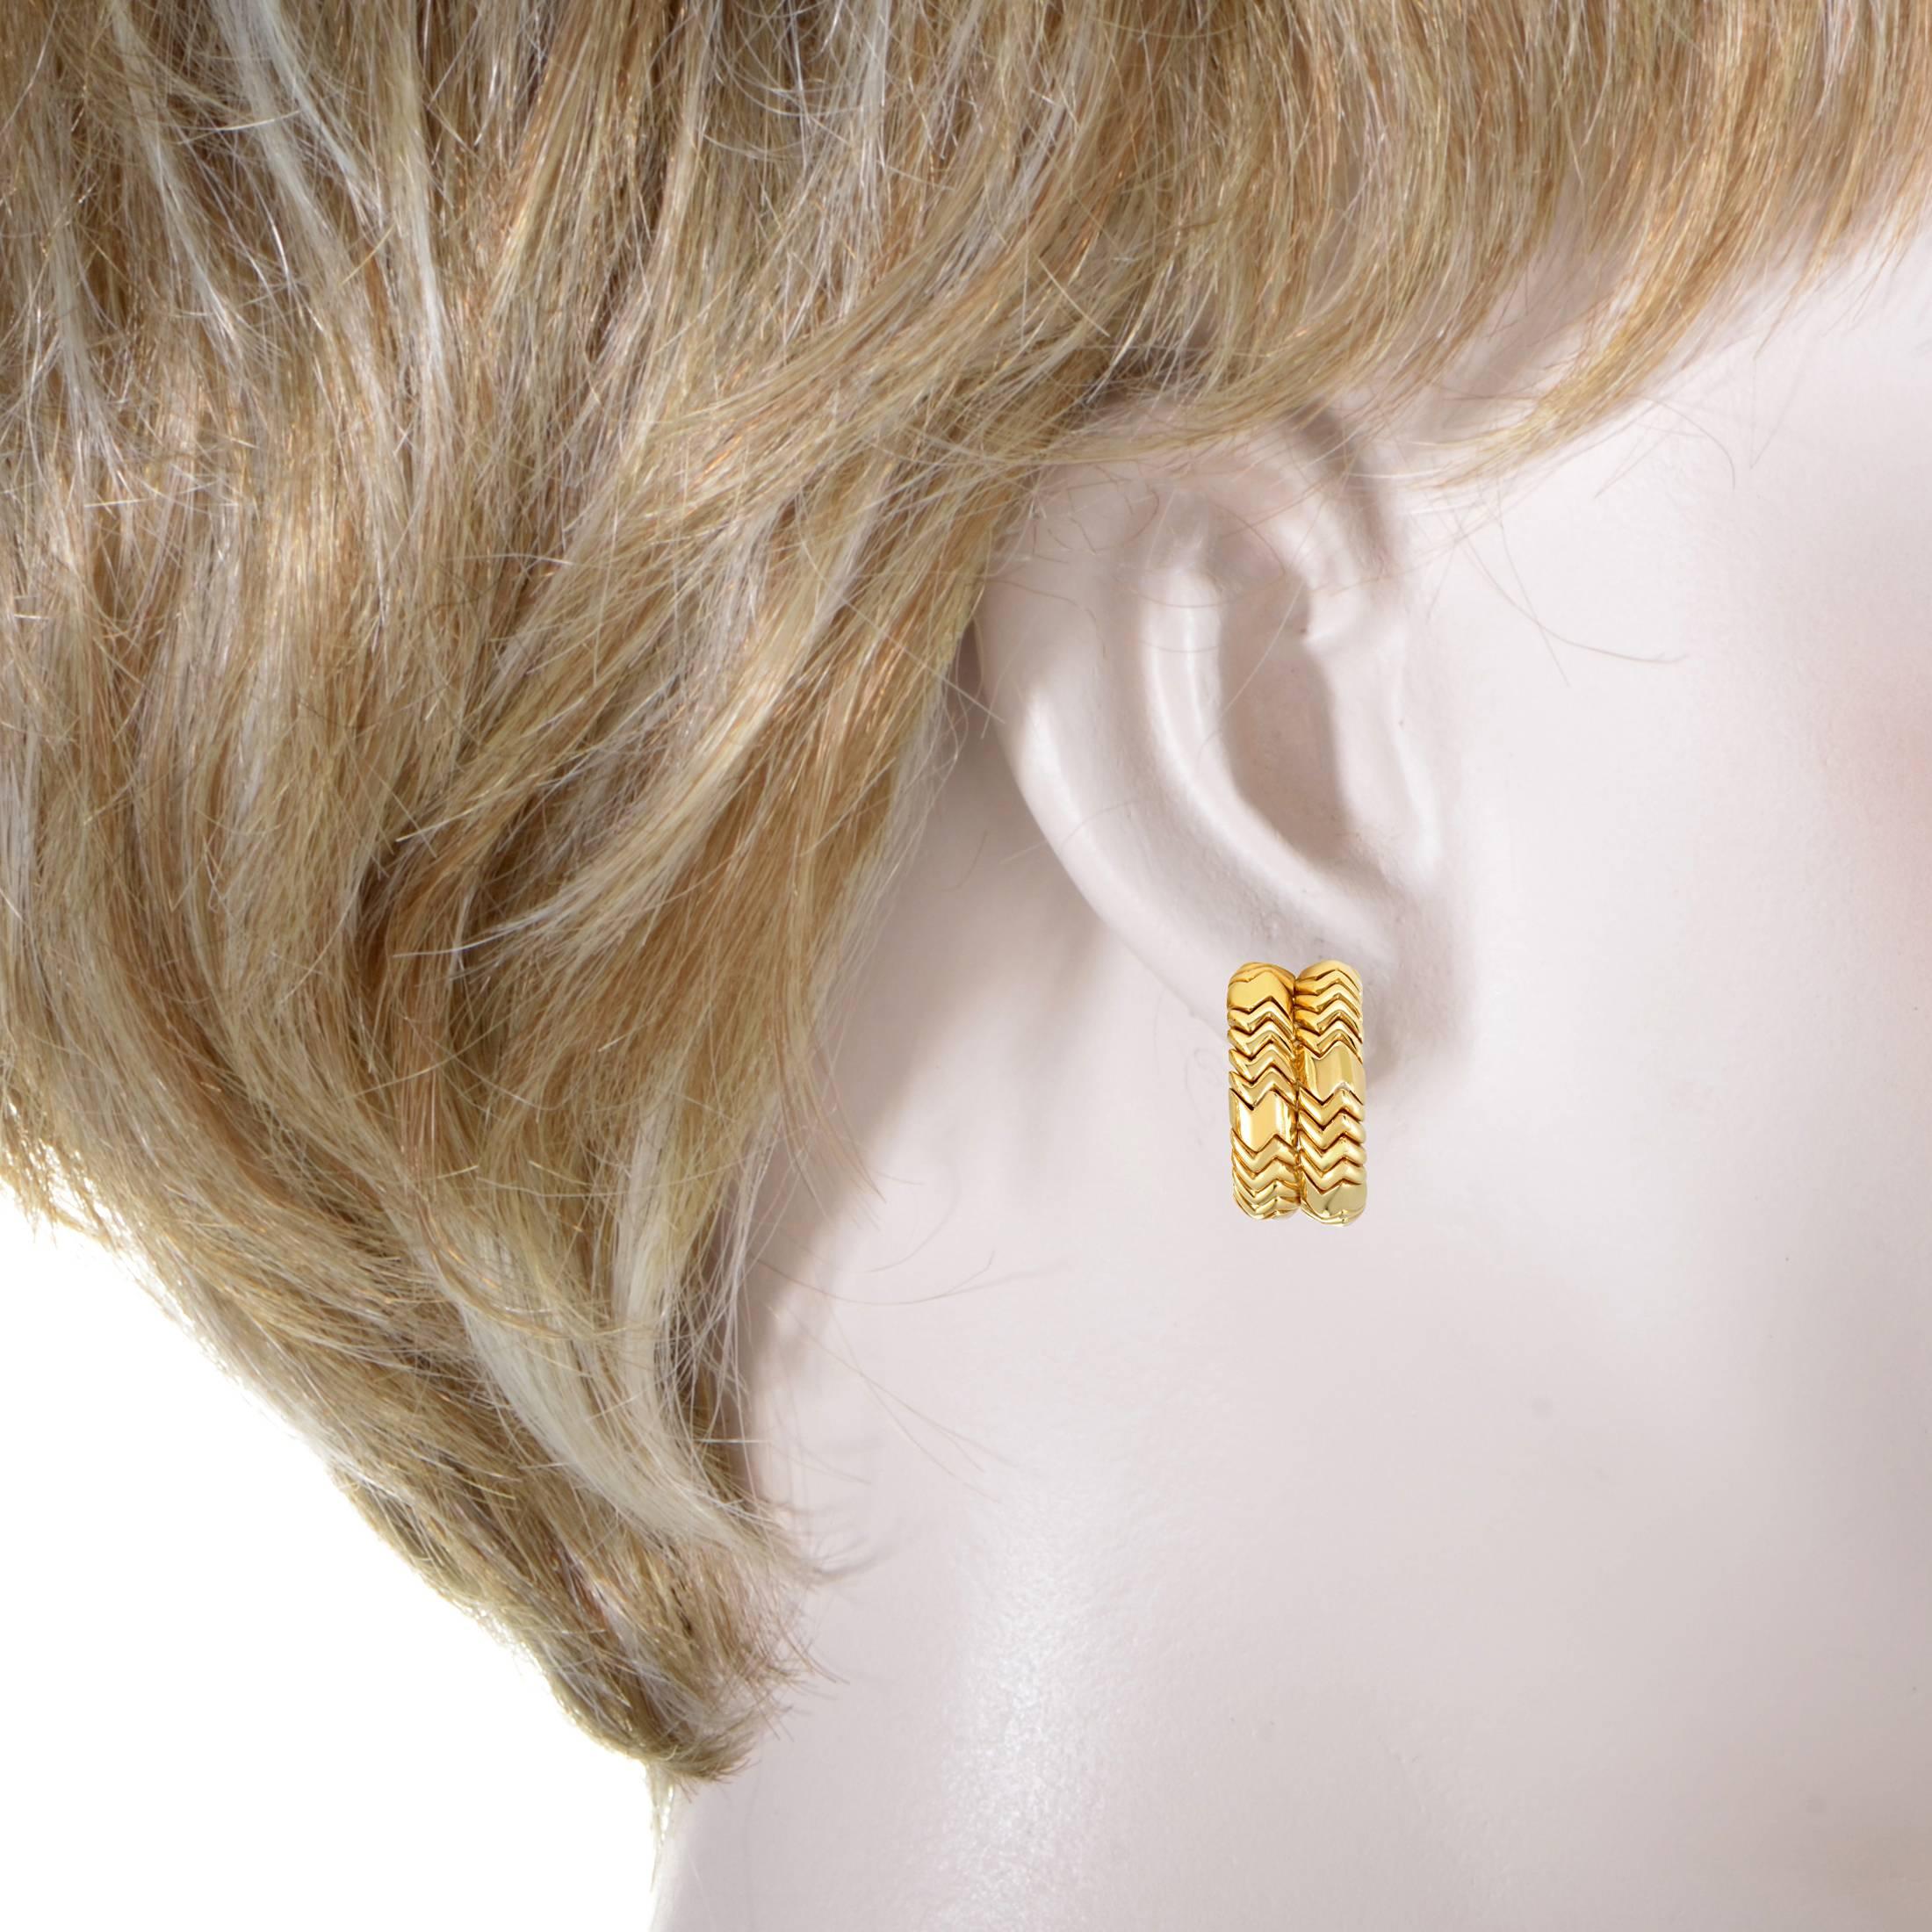 Gracing these fabulous earrings with an intriguing and seemingly dynamic look, Bulgari employed a fantastic pattern that enriches the unblemished surface of luxurious 18K yellow gold, producing irresistible allure in the process.
Retail Price: